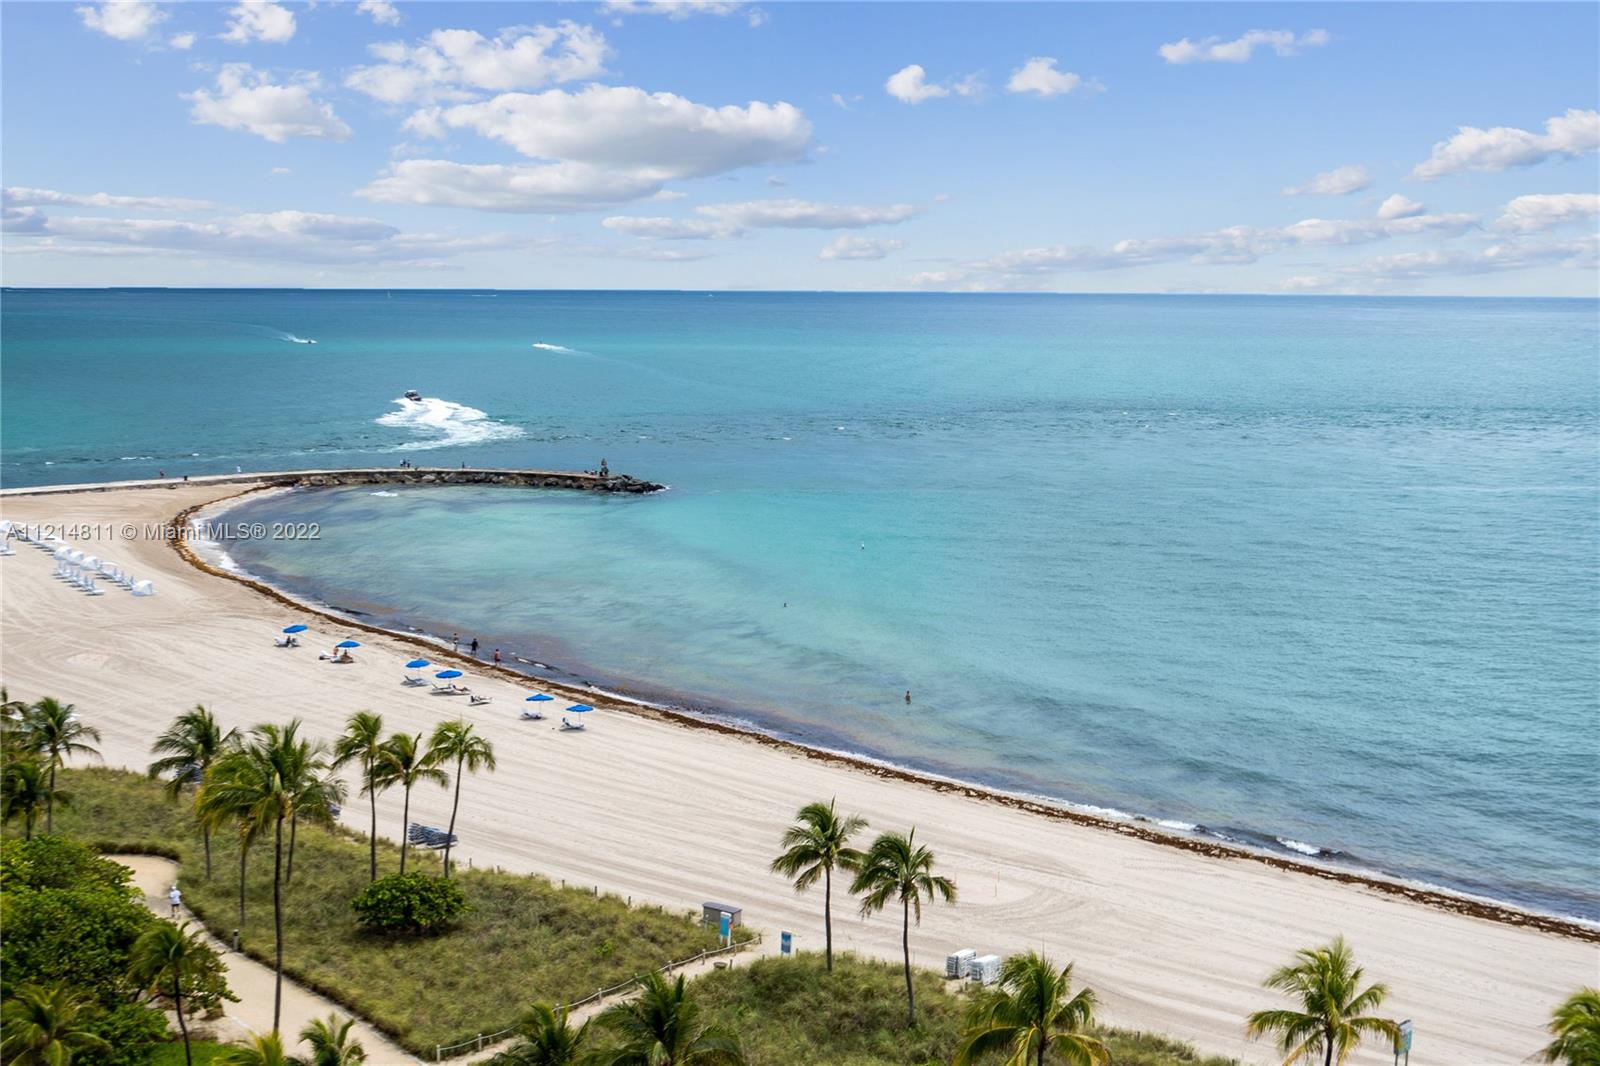 REDUCED! Elegant remodeled oceanfront 4 bedroom 5.5 bathroom unit in Bal Harbour, the 4th bedroom is an independent staff and laundry room. This expansive 3,800+Sq ft unit offers the most desirable South East exposure with a wrap around balcony allowing for the best indoor/outdoor living. Private elevator, 10 foot ceilings, recessed lightings, design chandeliers, custom kitchen cabinets and motorized window treatments are among the many features that give this Oceanside residence a one of a kind feel. Enjoy infinite views of the Ocean, North to South, the Bal Harbour pier, the afternoon sun on the South terrace and sunset views over the intracoastal. Bellini offers an on site restaurant/cafe' with indoor and outdoor seating, swimming pool, beach service, fitness center and Spa.